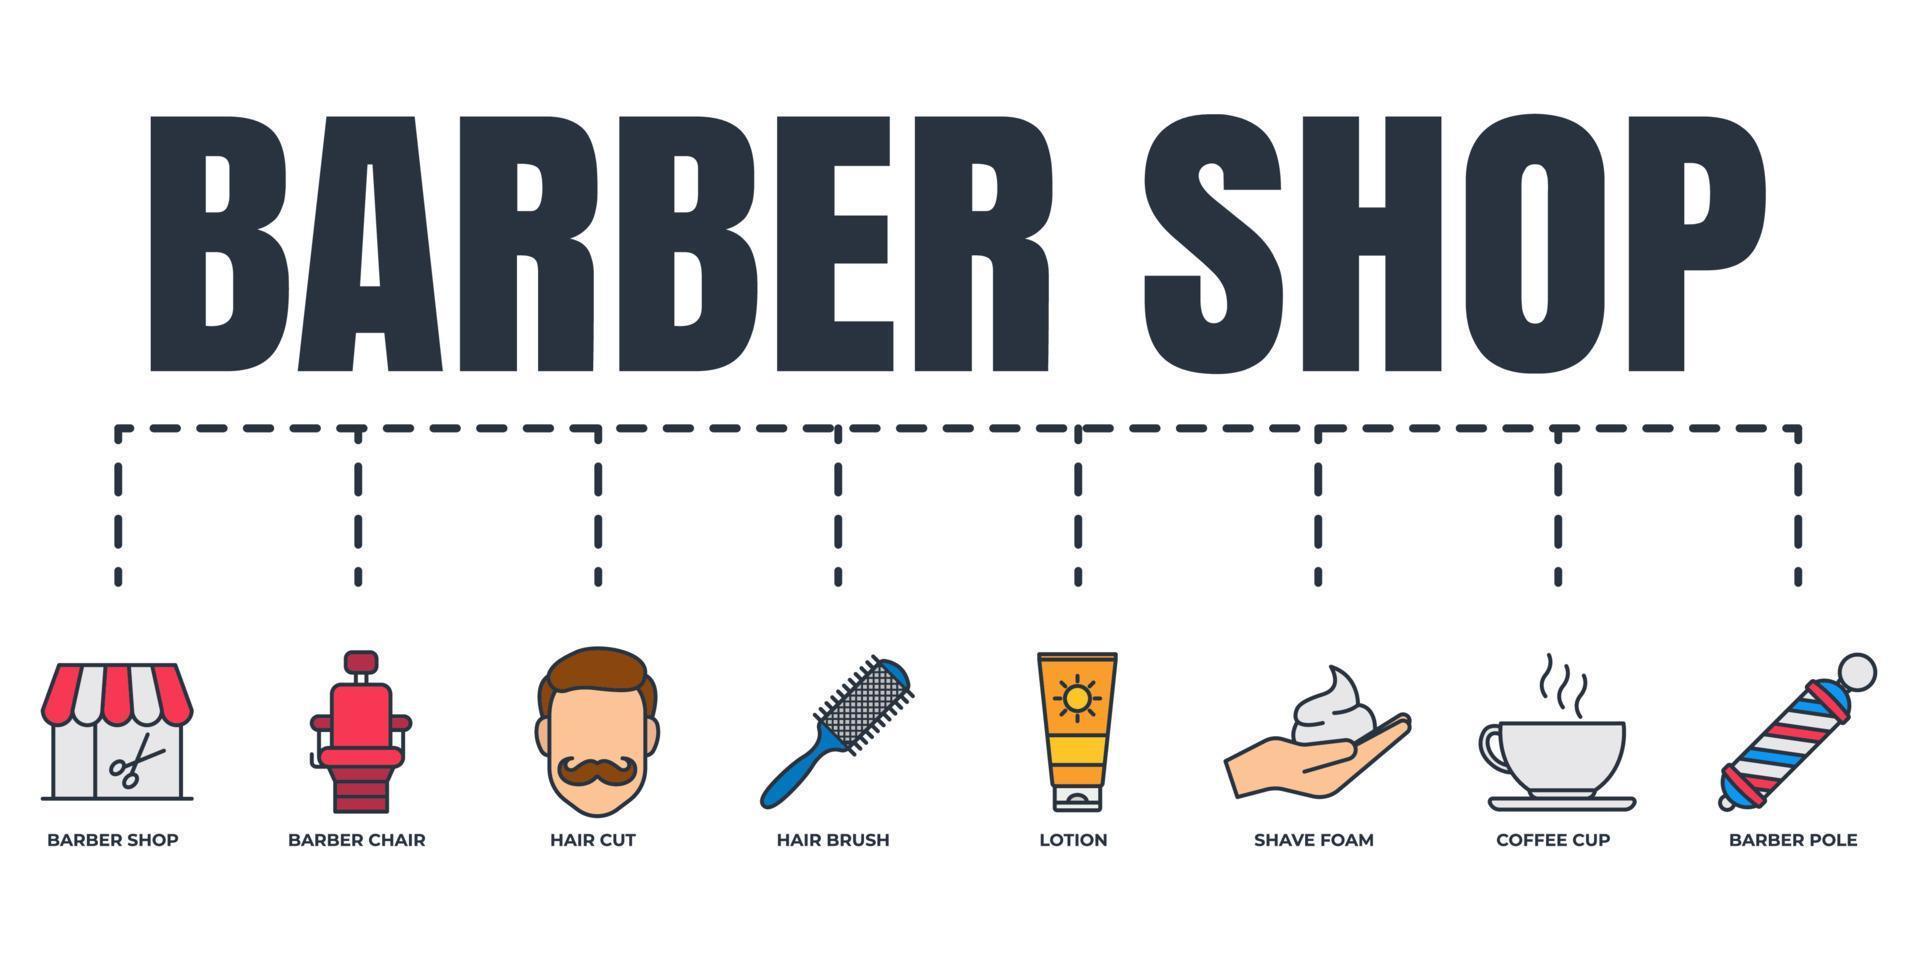 Barber shop banner web icon set. shave foam, barber chair, barber shop, hair brush, hair cut, lotion, barber pole, coffee cup vector illustration concept.